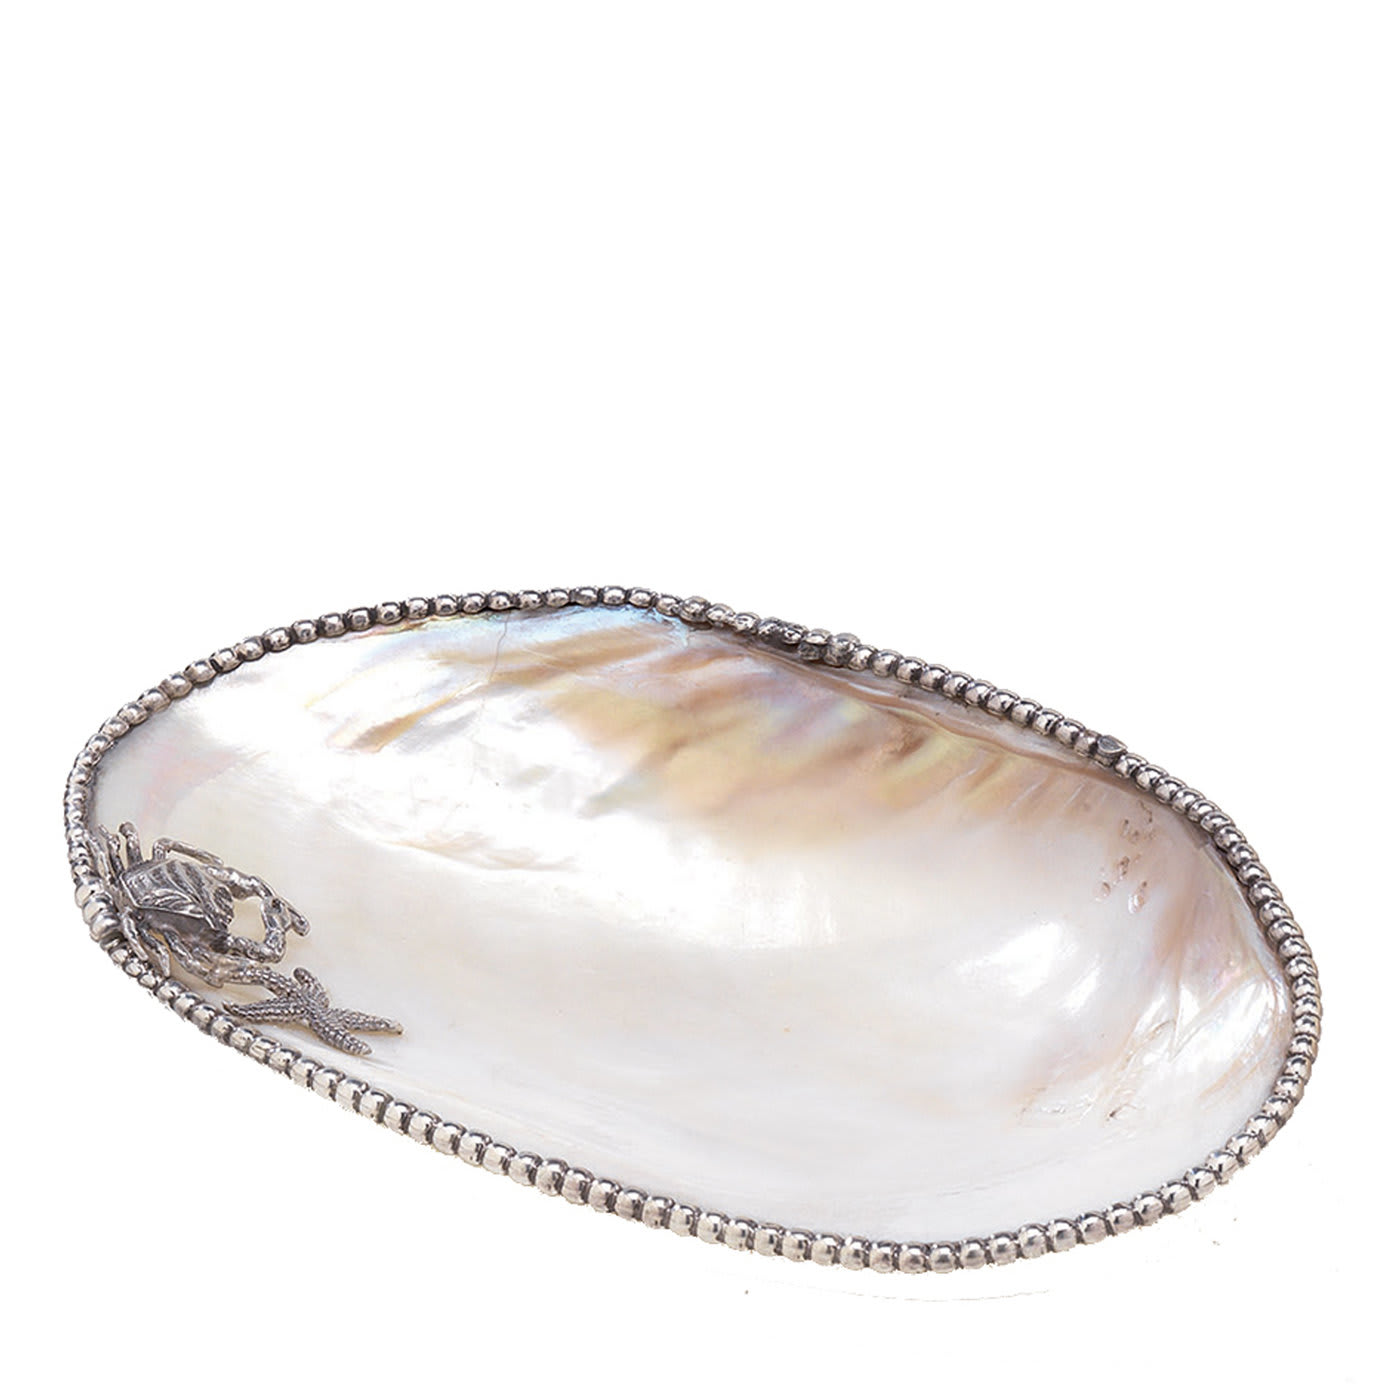 Small Mother of Pearl Plate - L’argento Firenze